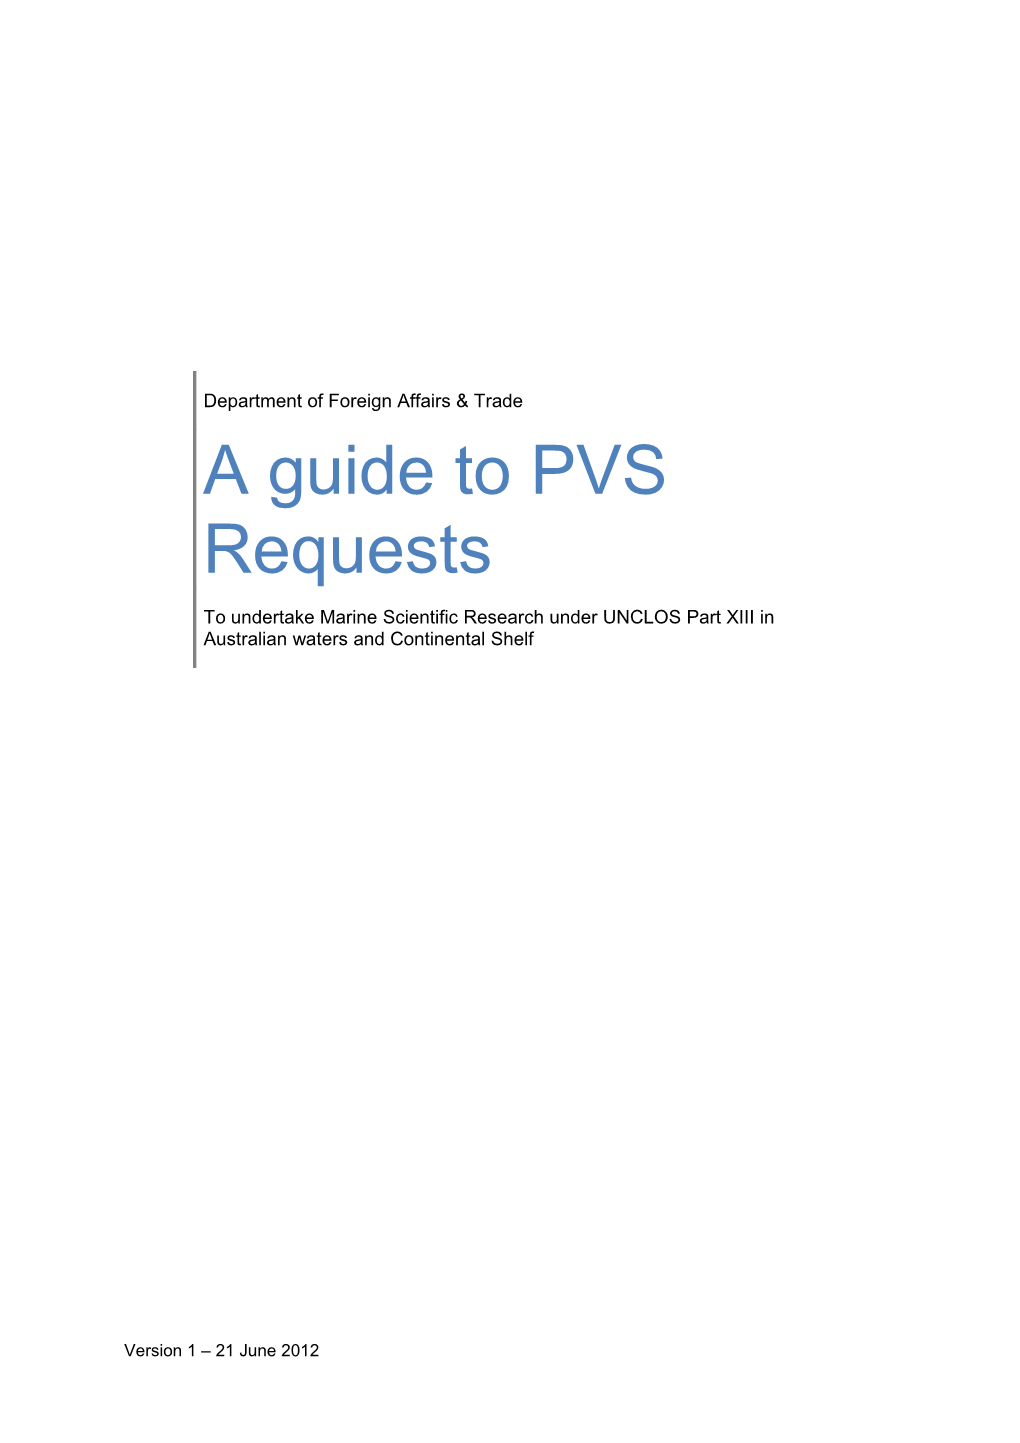 A Guide to PVS Requests